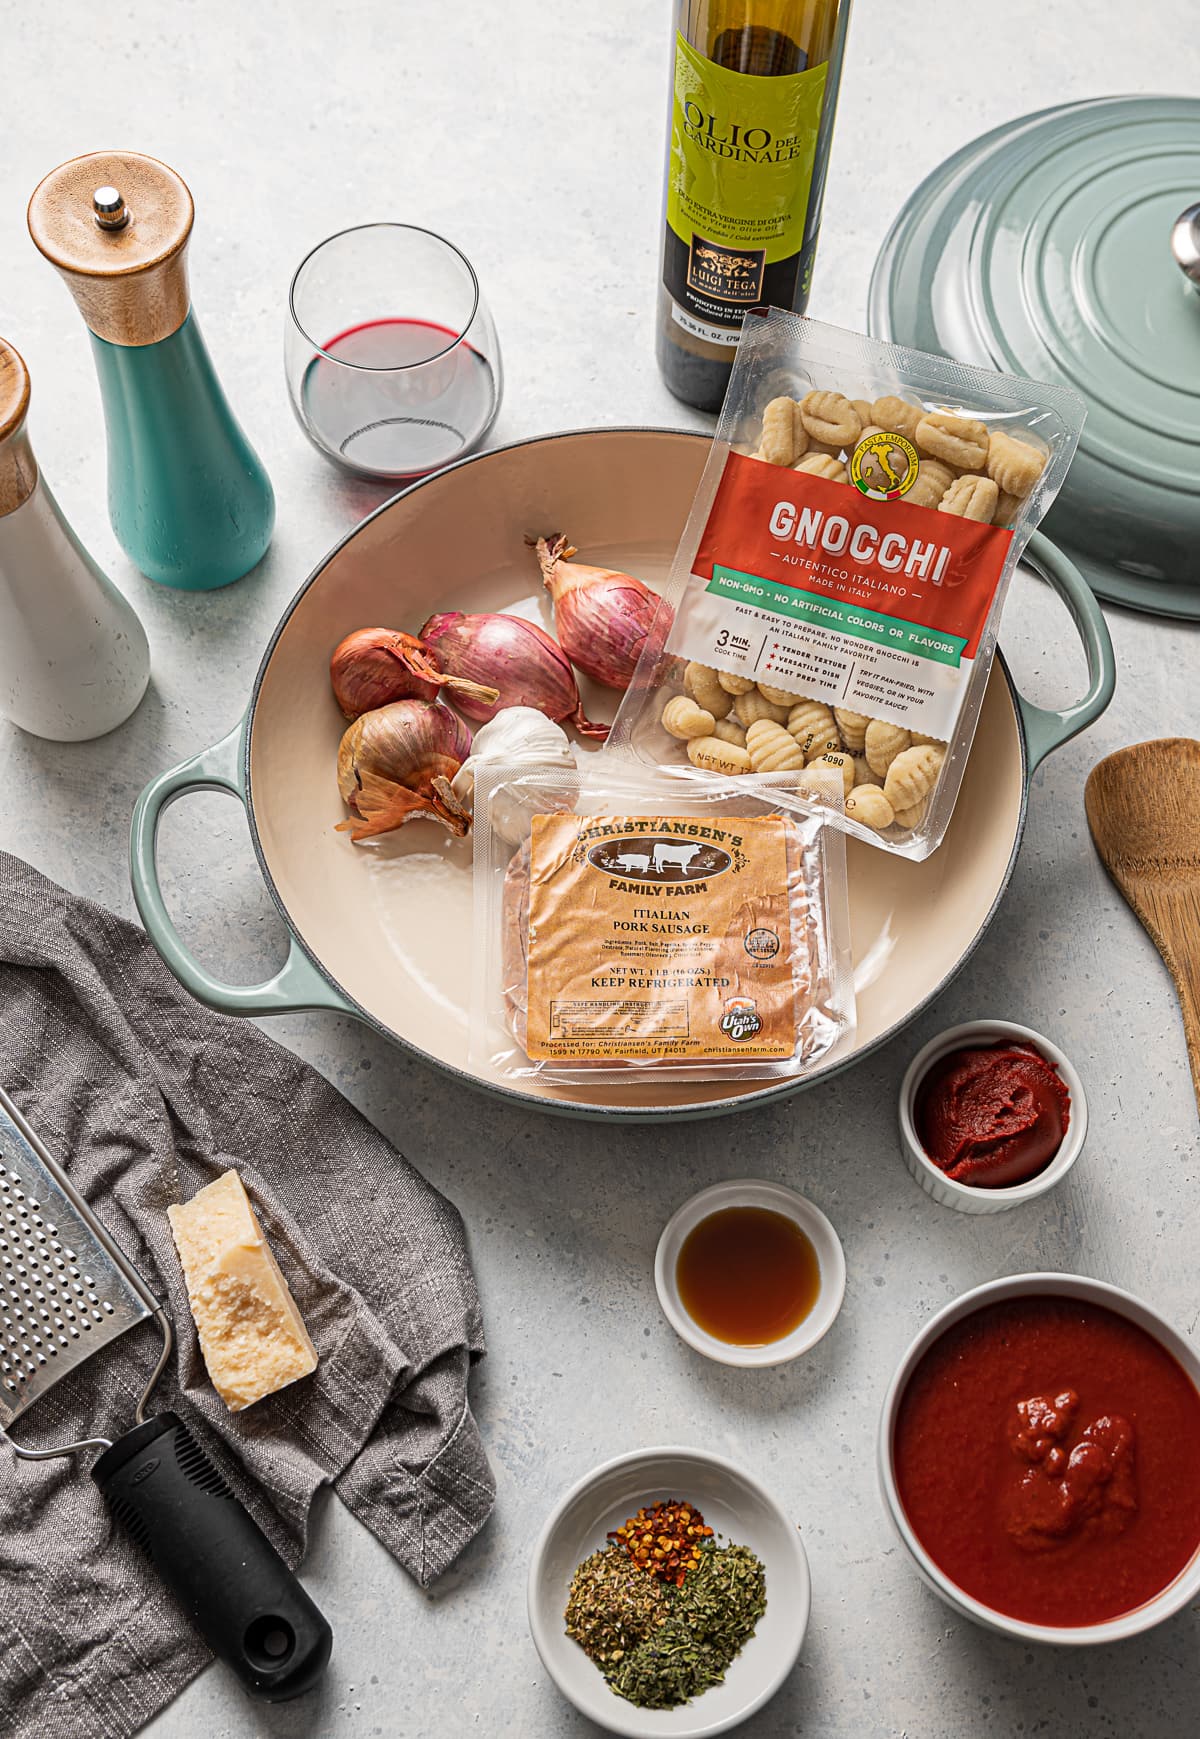 large aqua pan full of recipe ingredients, package of Italian sausage, package of gnocchi, shallots, garlic, bowls of tomato sauce, bottle of olive oil, chink of parmesan cheese, glass of red wine